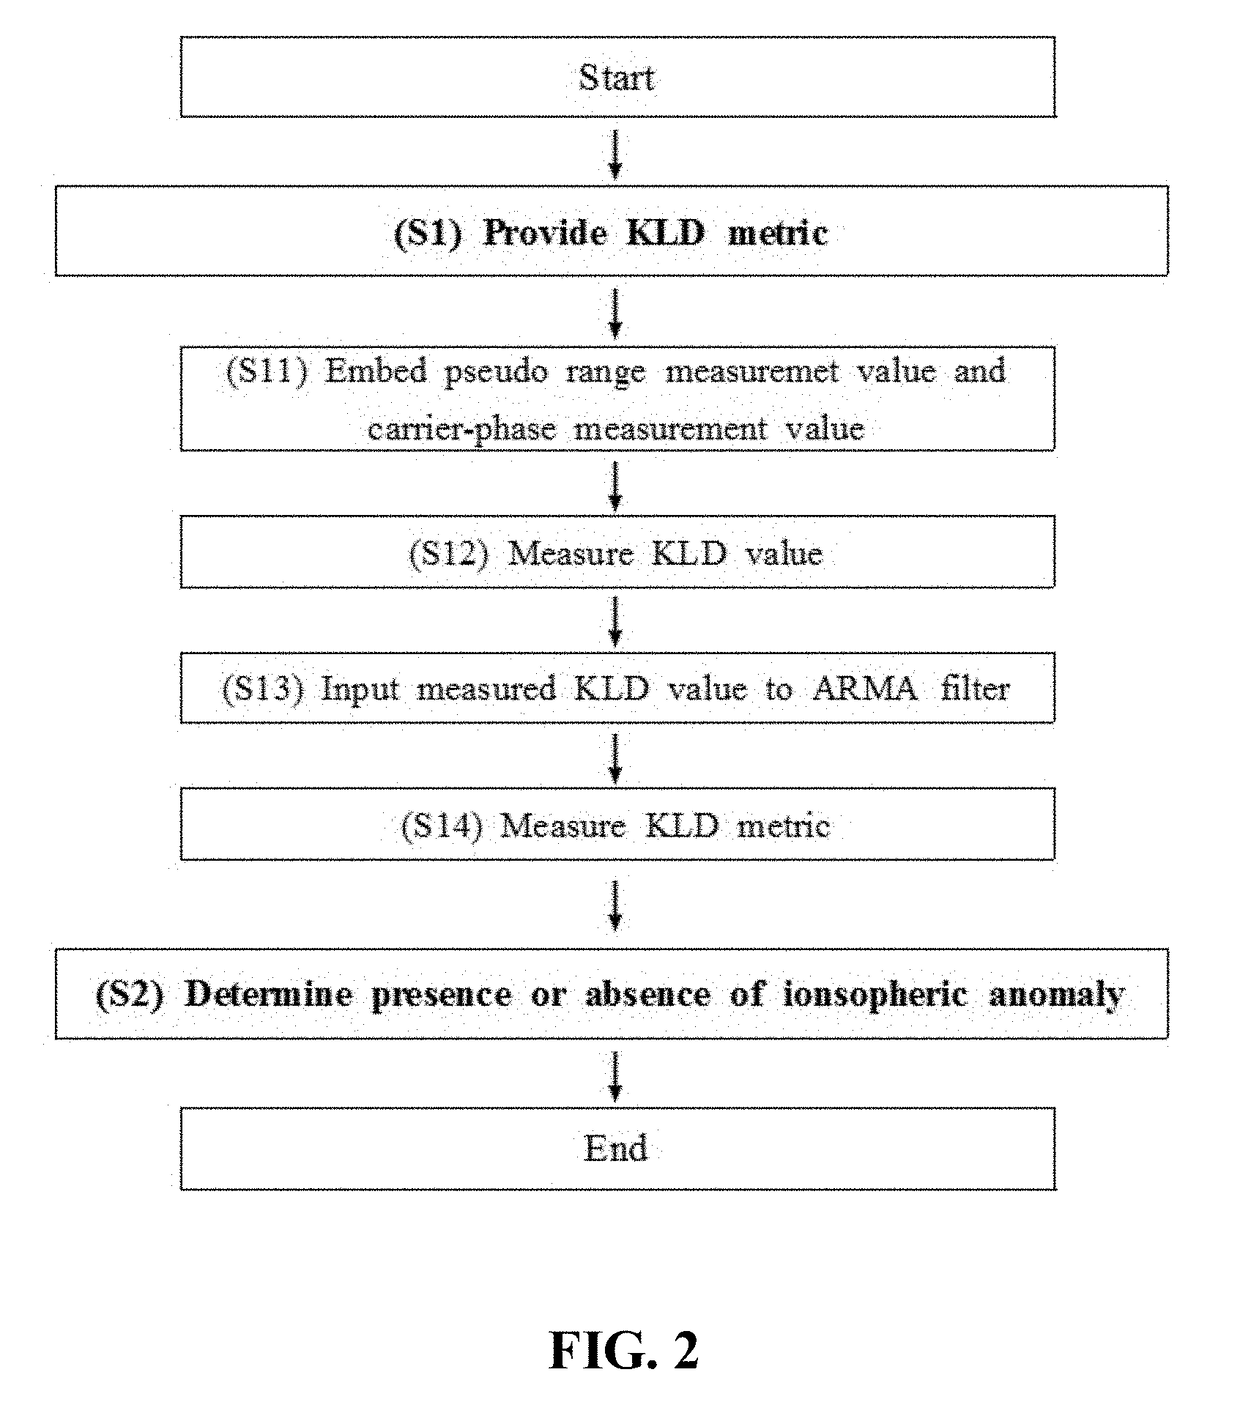 Apparatus and method for ionospheric anomaly monitoring using kullback-leibler divergence metric for gbas